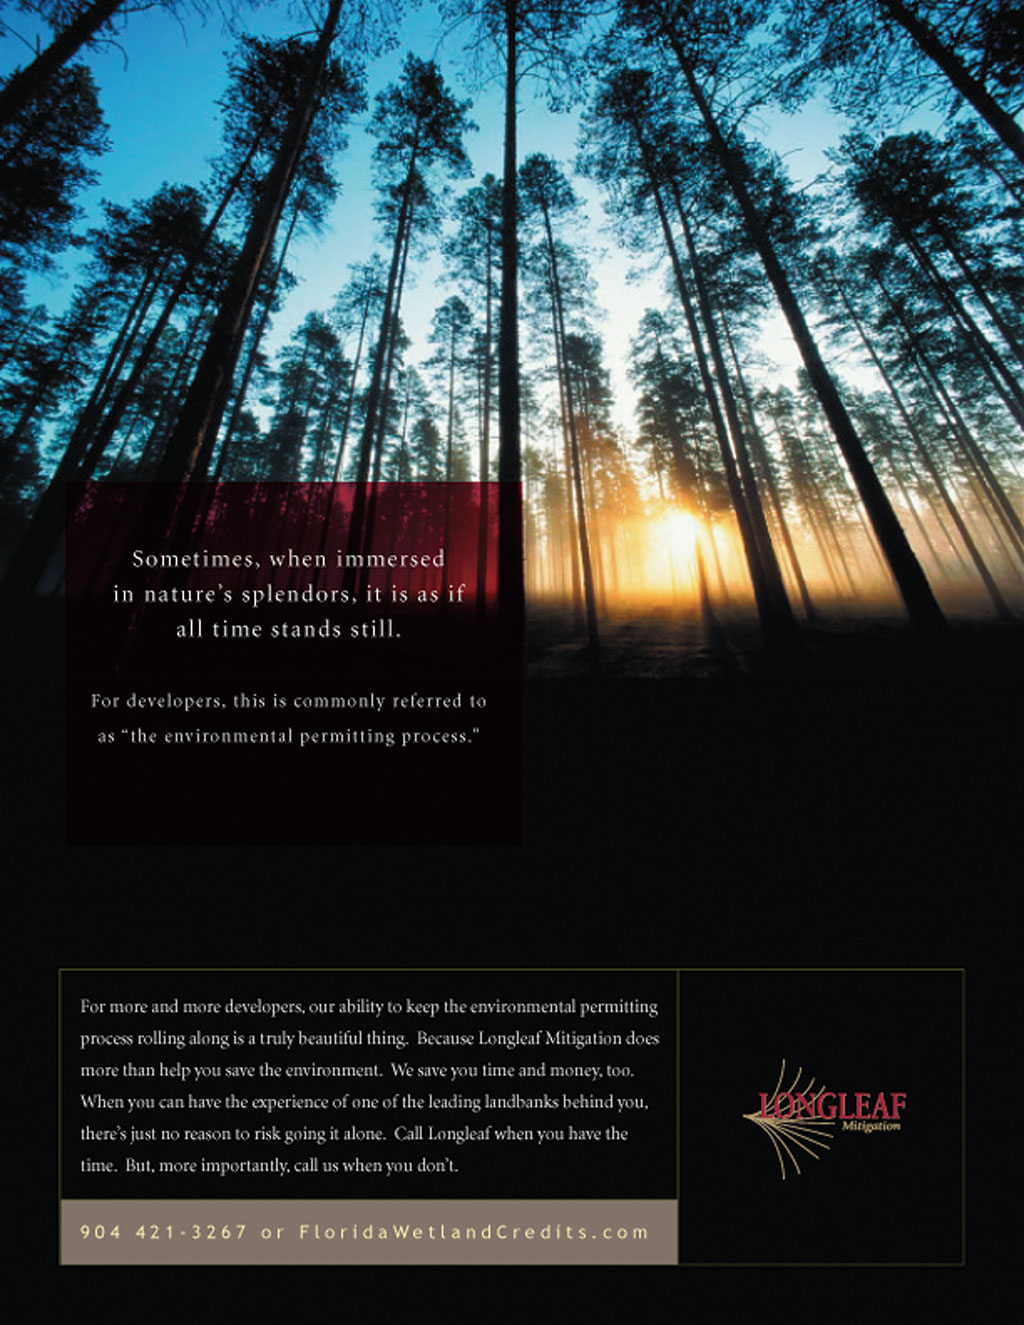 Harrington Design Company, a digital marketing agency located in Jacksonville, FL, played an important role in developing the corporate identity, business stationery, brochure, and web design for Longleaf Mitigation.